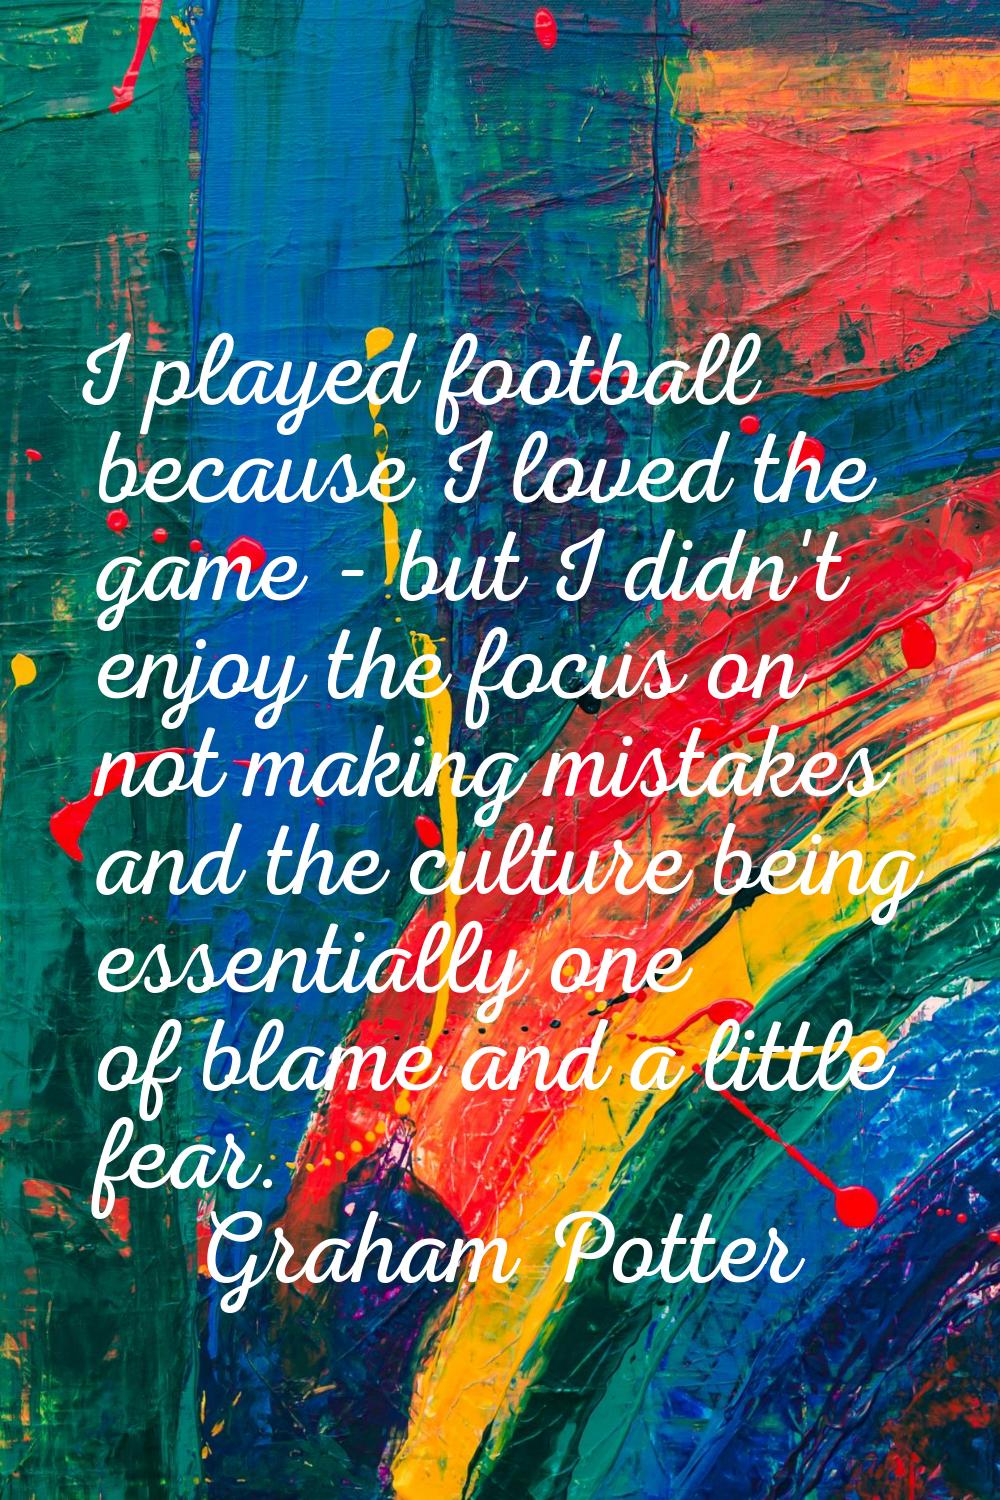 I played football because I loved the game - but I didn't enjoy the focus on not making mistakes an